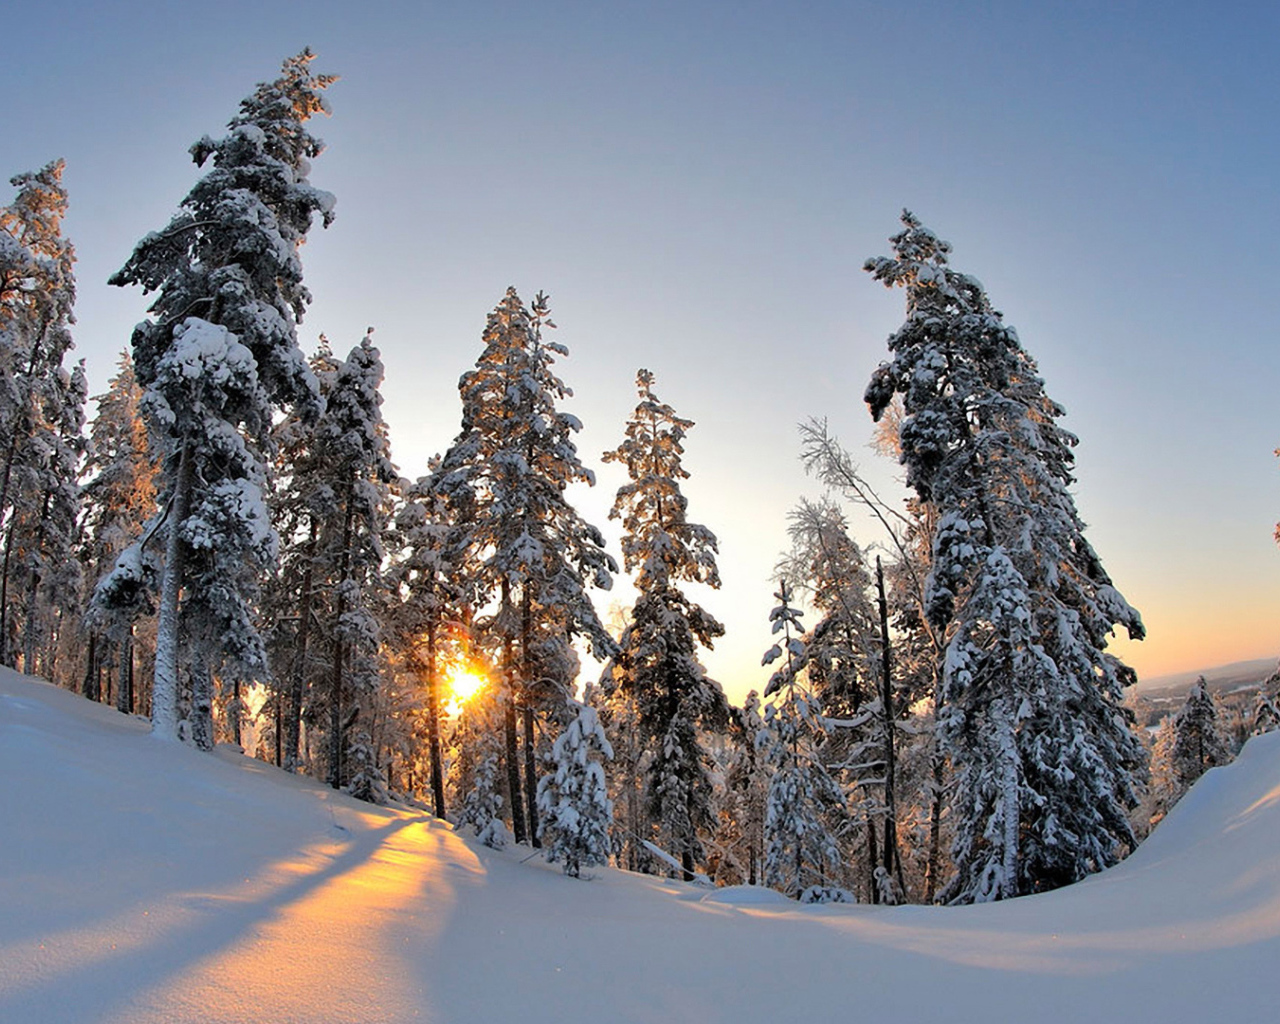 Trees under heavy snow in winter forest